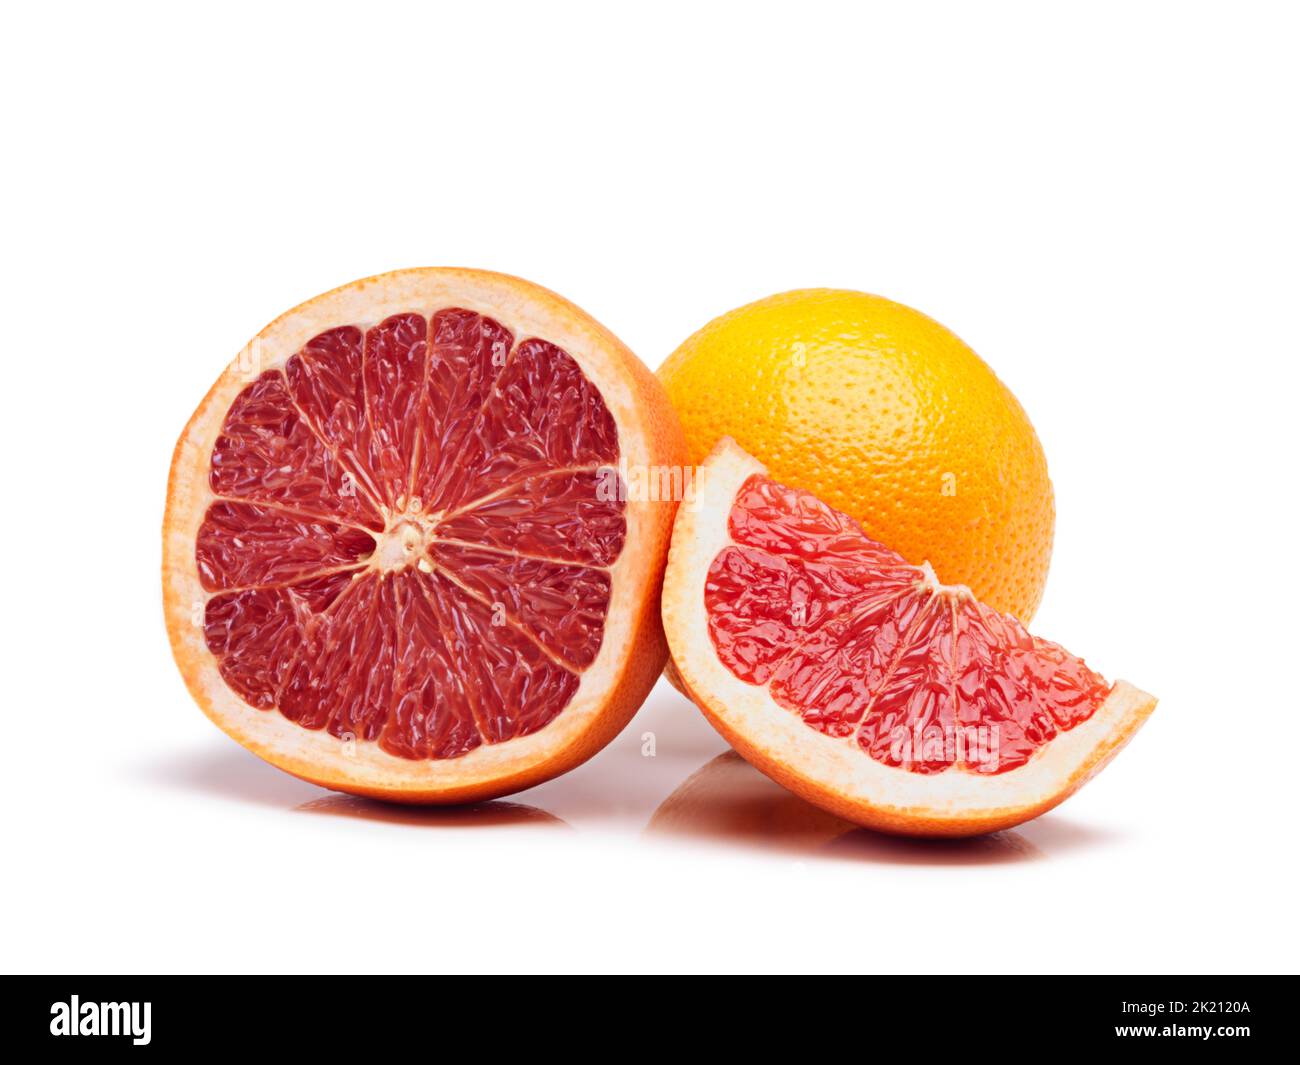 Juicy nutrients. Studio shot of a cut grapefruit with an orange in the background. Stock Photo